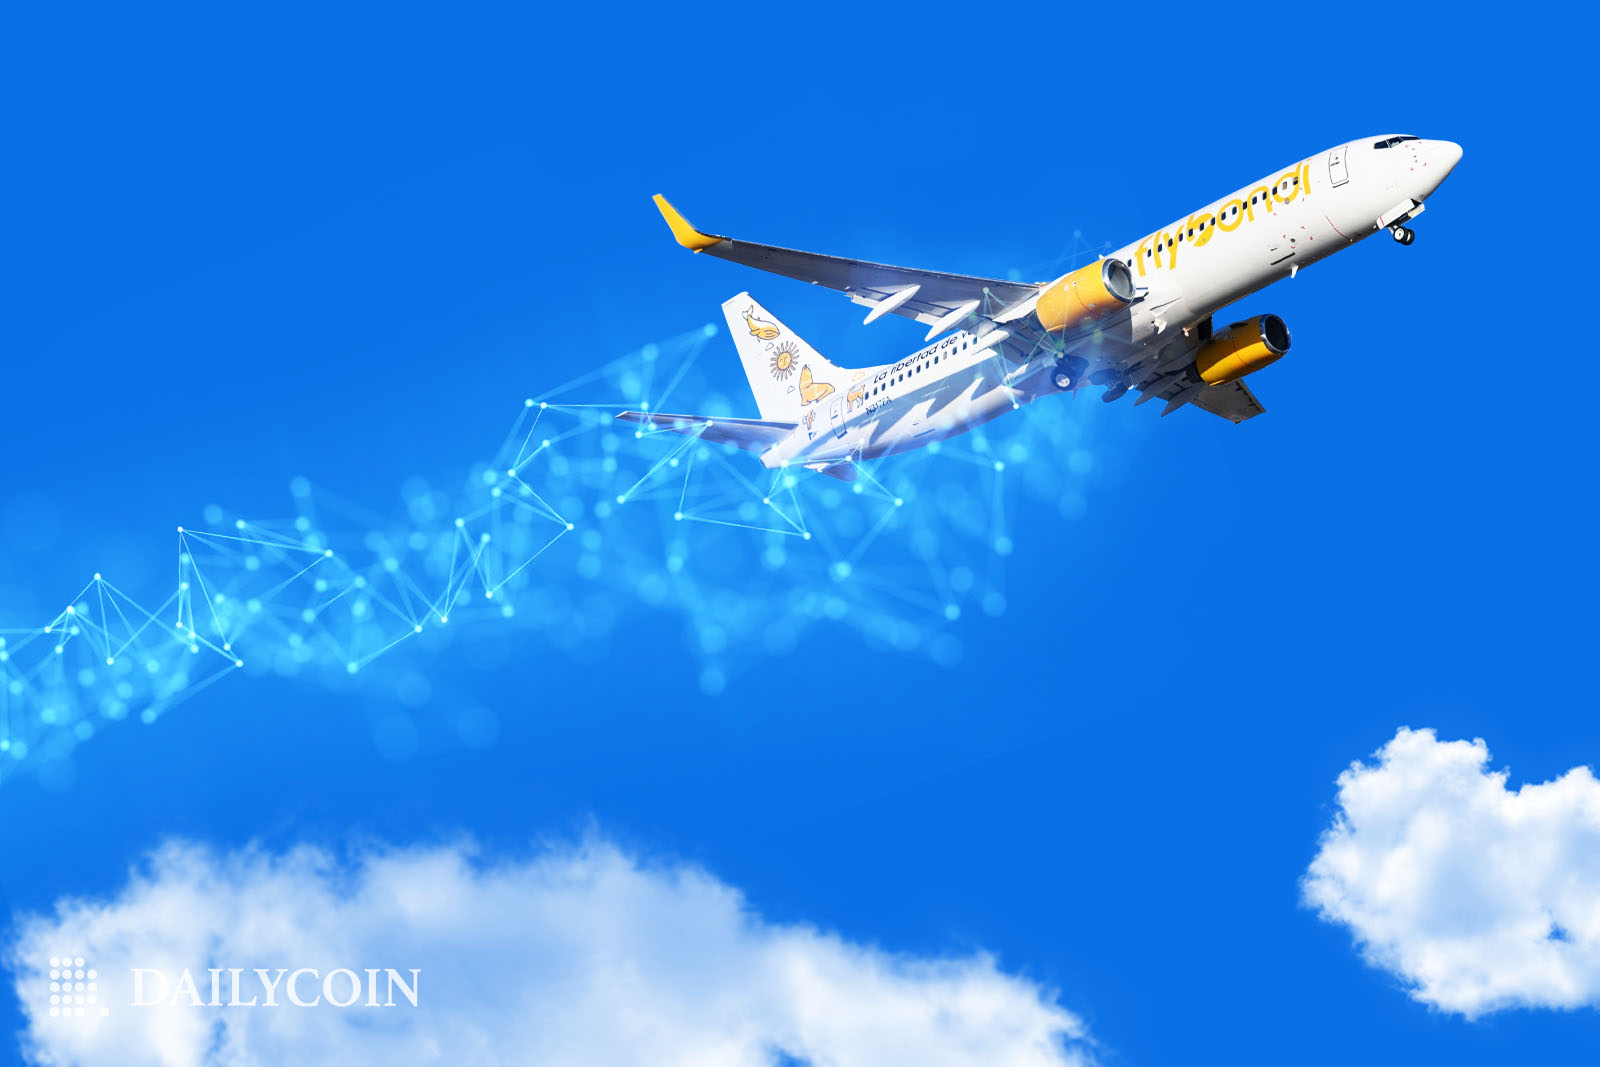 Flybondi airlines with NFT flight tickets.